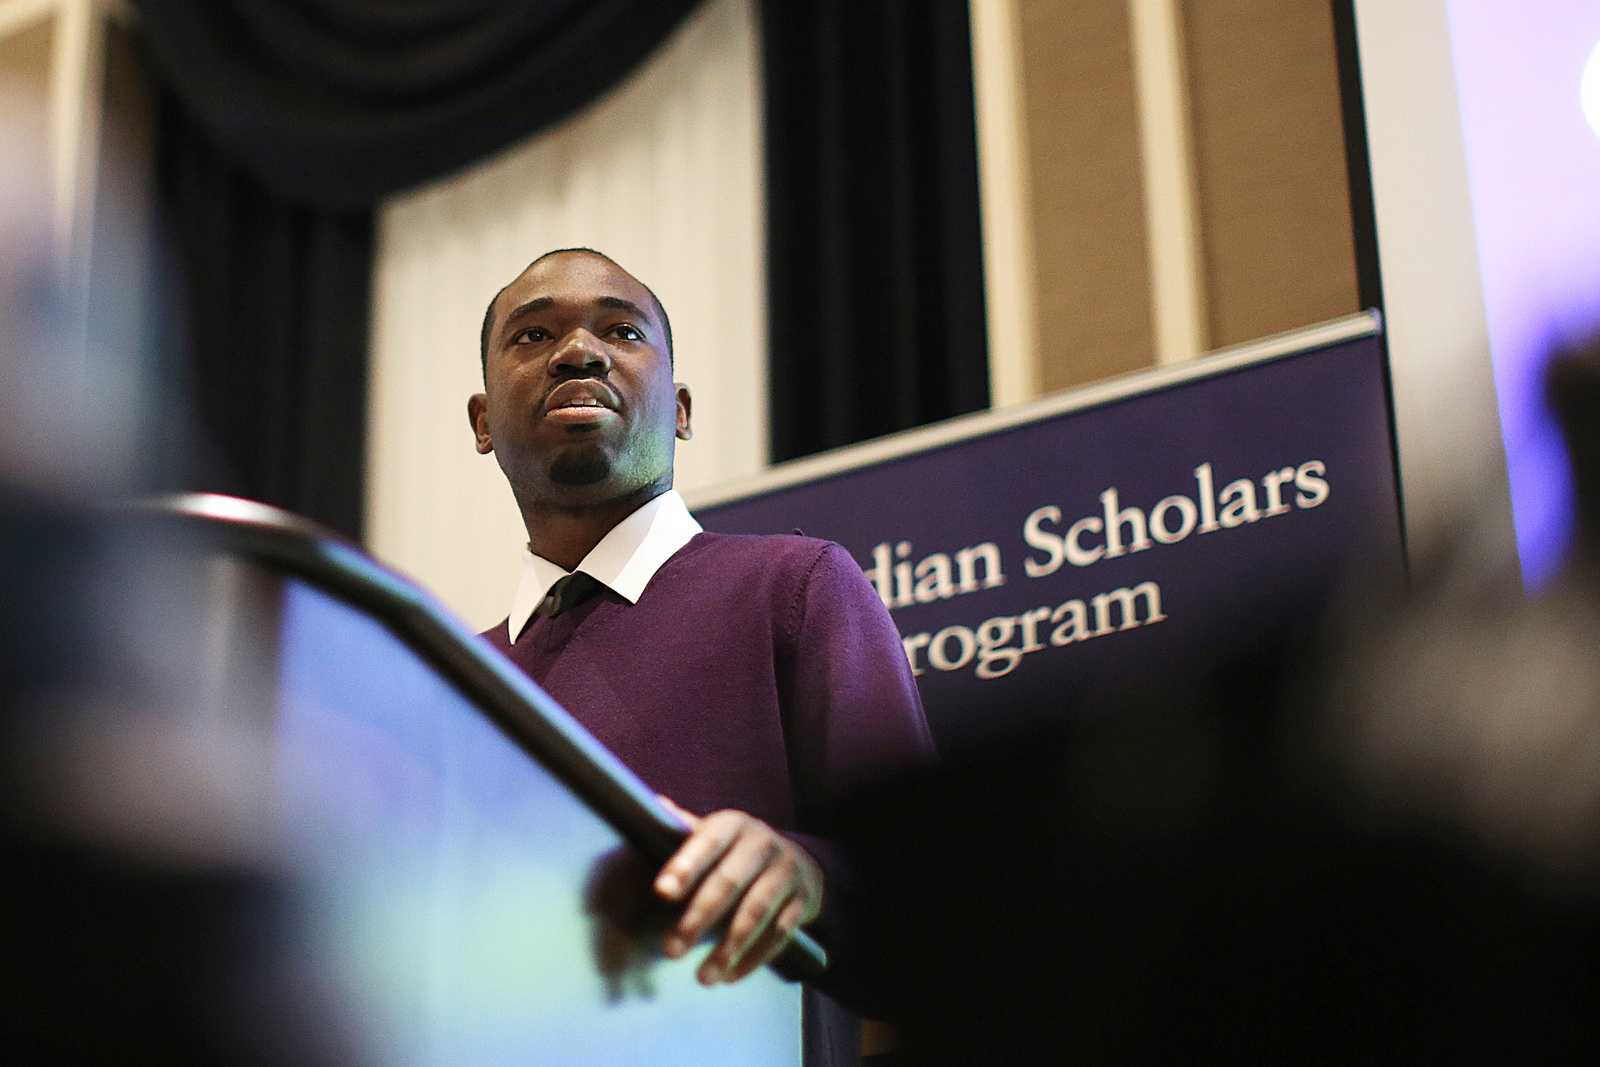 SF State student Lewis Woods, keynote speaker for the 5th annual Guardian Scholars Program Luncheon, gives a speech at the Sir Frances Drake Hotel on Oct 18. The Guardian Scholars Program is a SF State organization designed to help children in the foster care system transition into college life. Students in the Guardian Scholars Program have an 85 percent graduation rate. Photo by John Ornelas / Xpress